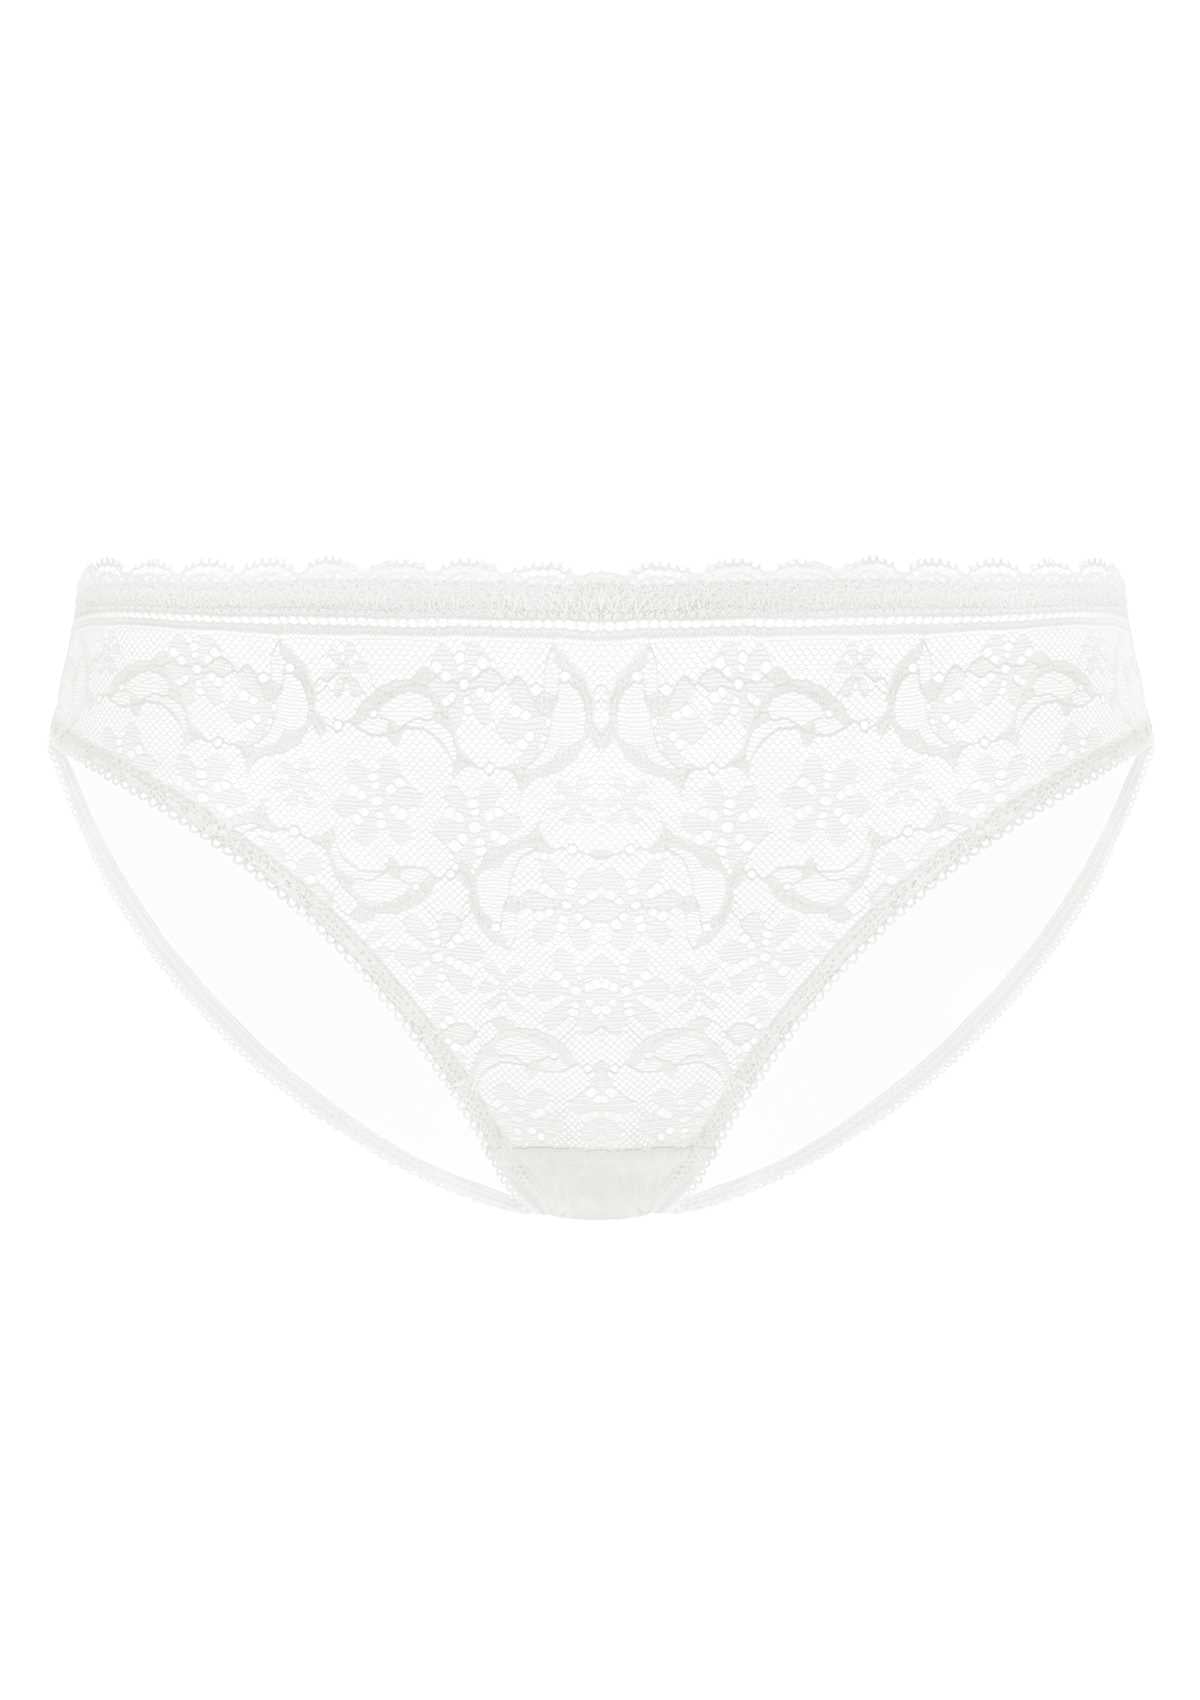 HSIA Anemone Lace Dolphin-Patterned Front And Mesh Back Panties-3 Pack - L / Black+Burgundy+White